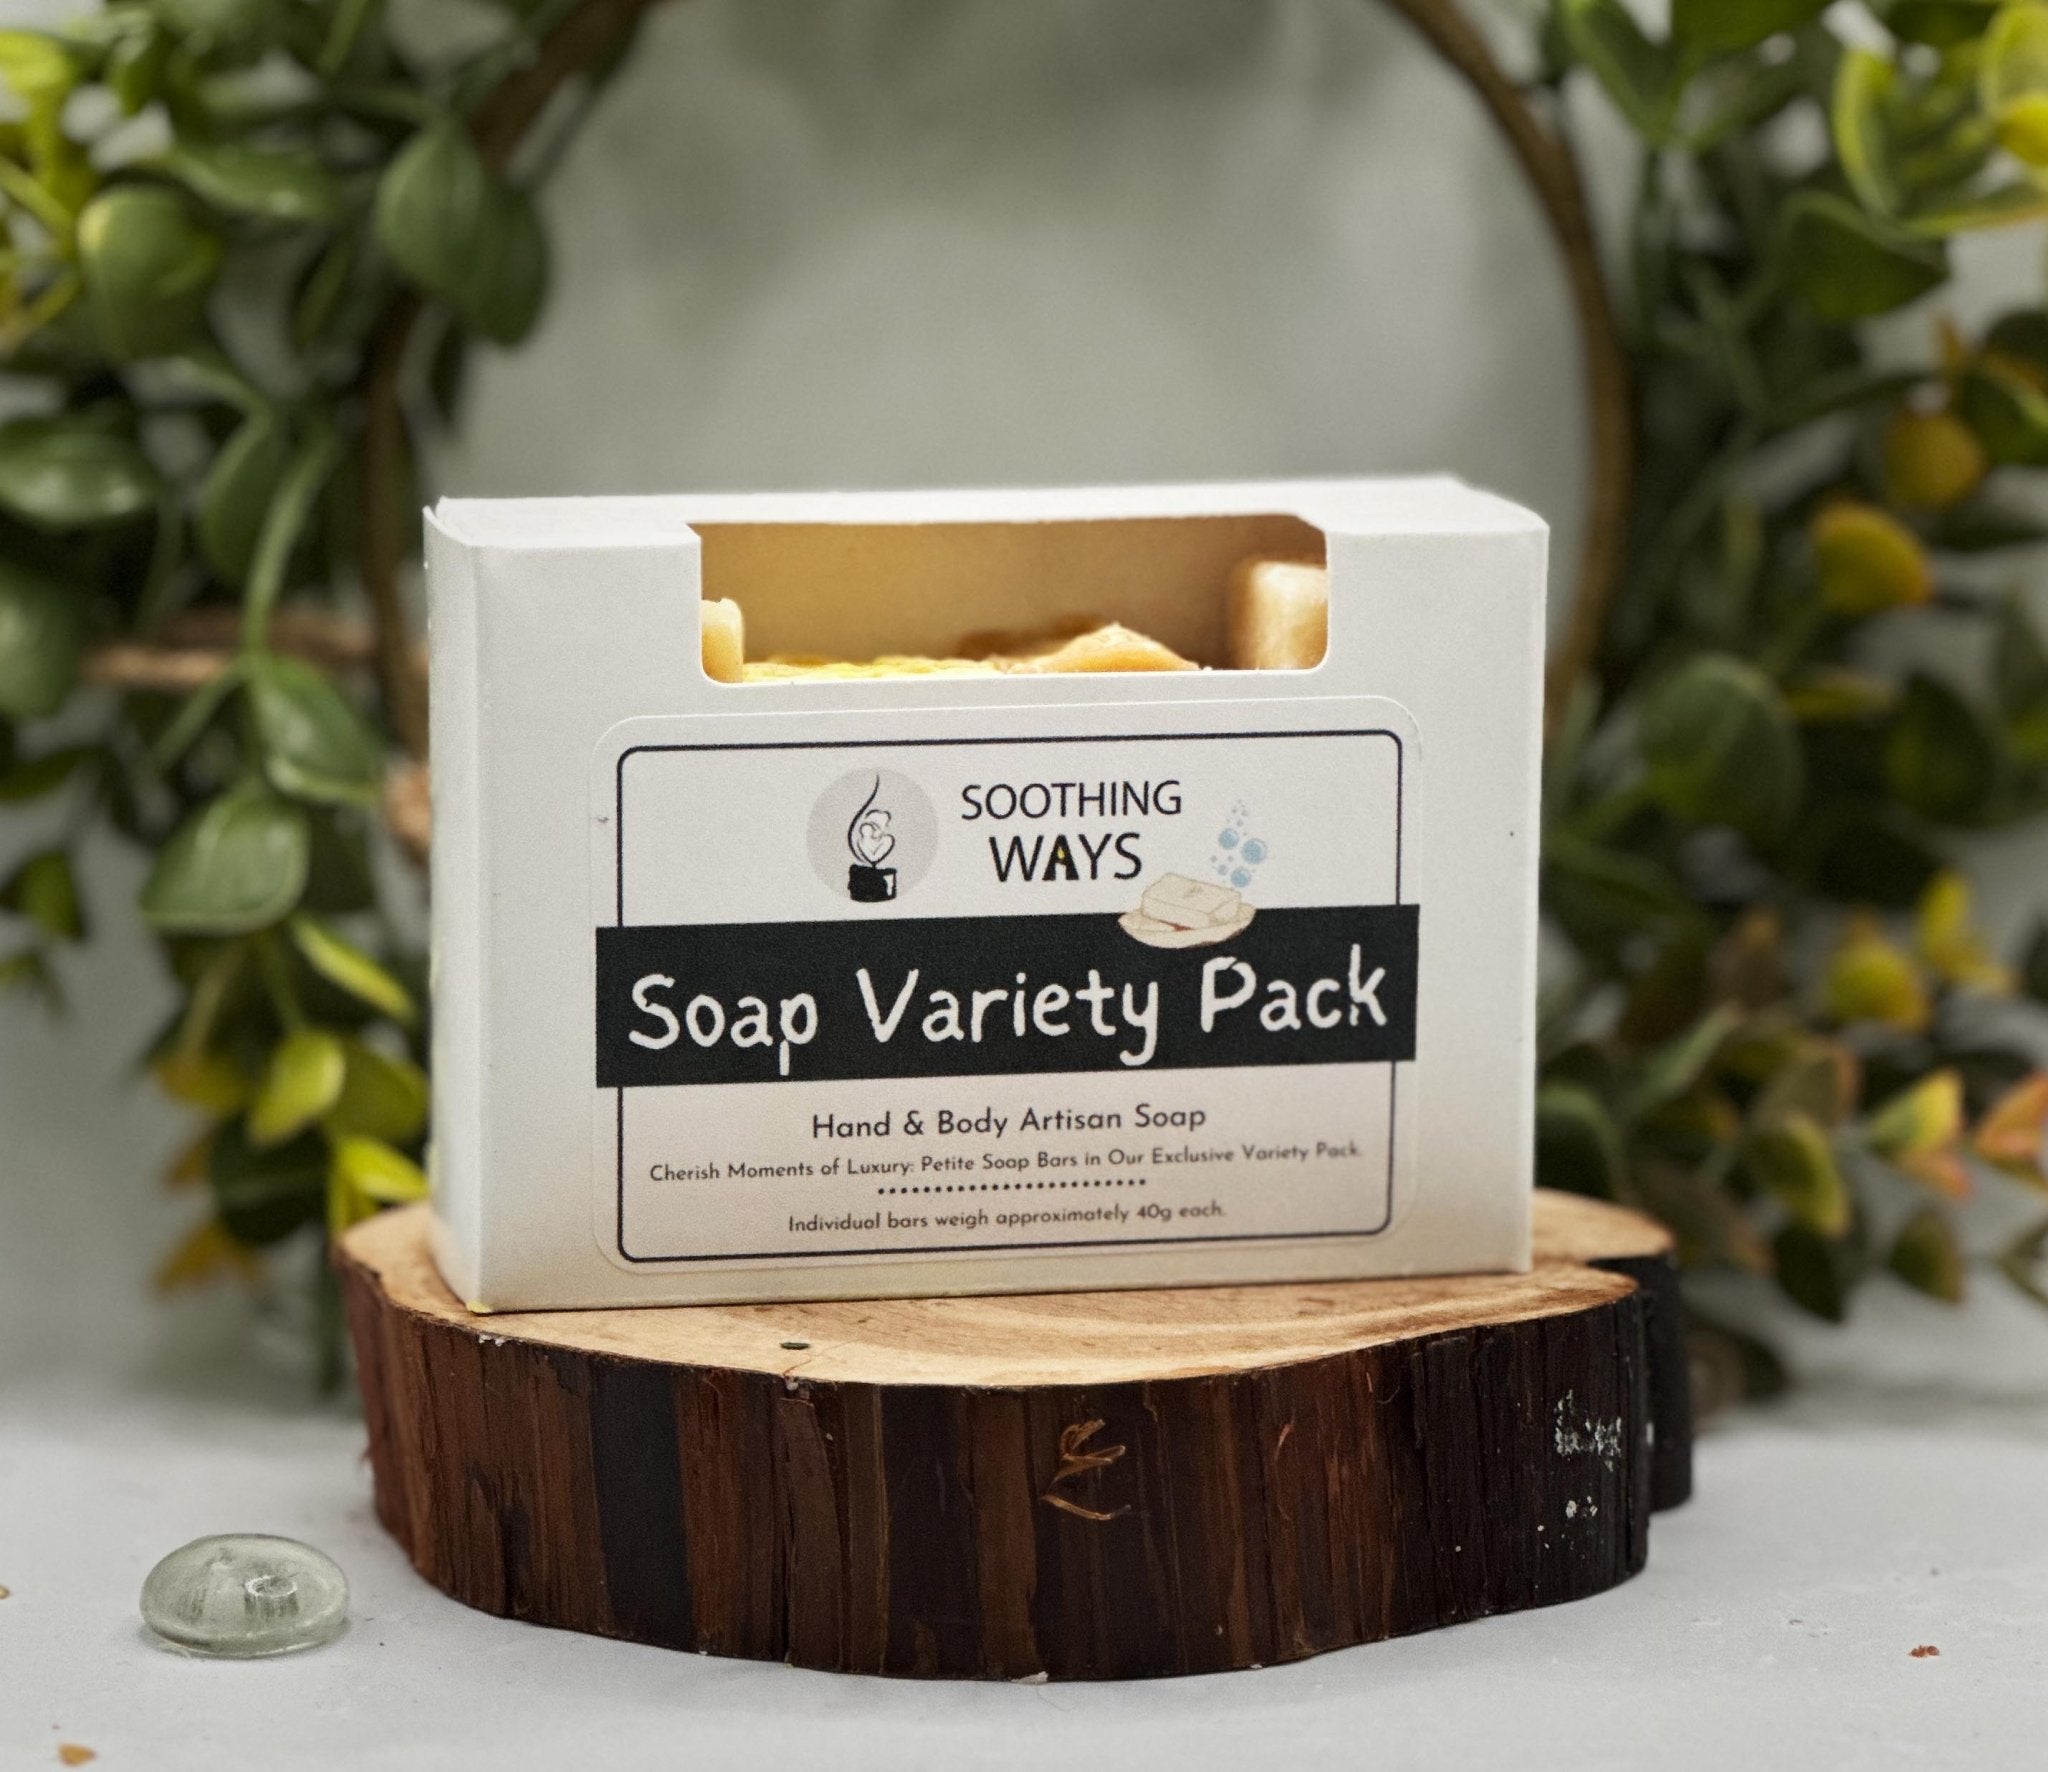 Soap Variety Pack - Artisan Soap - Soothing Ways